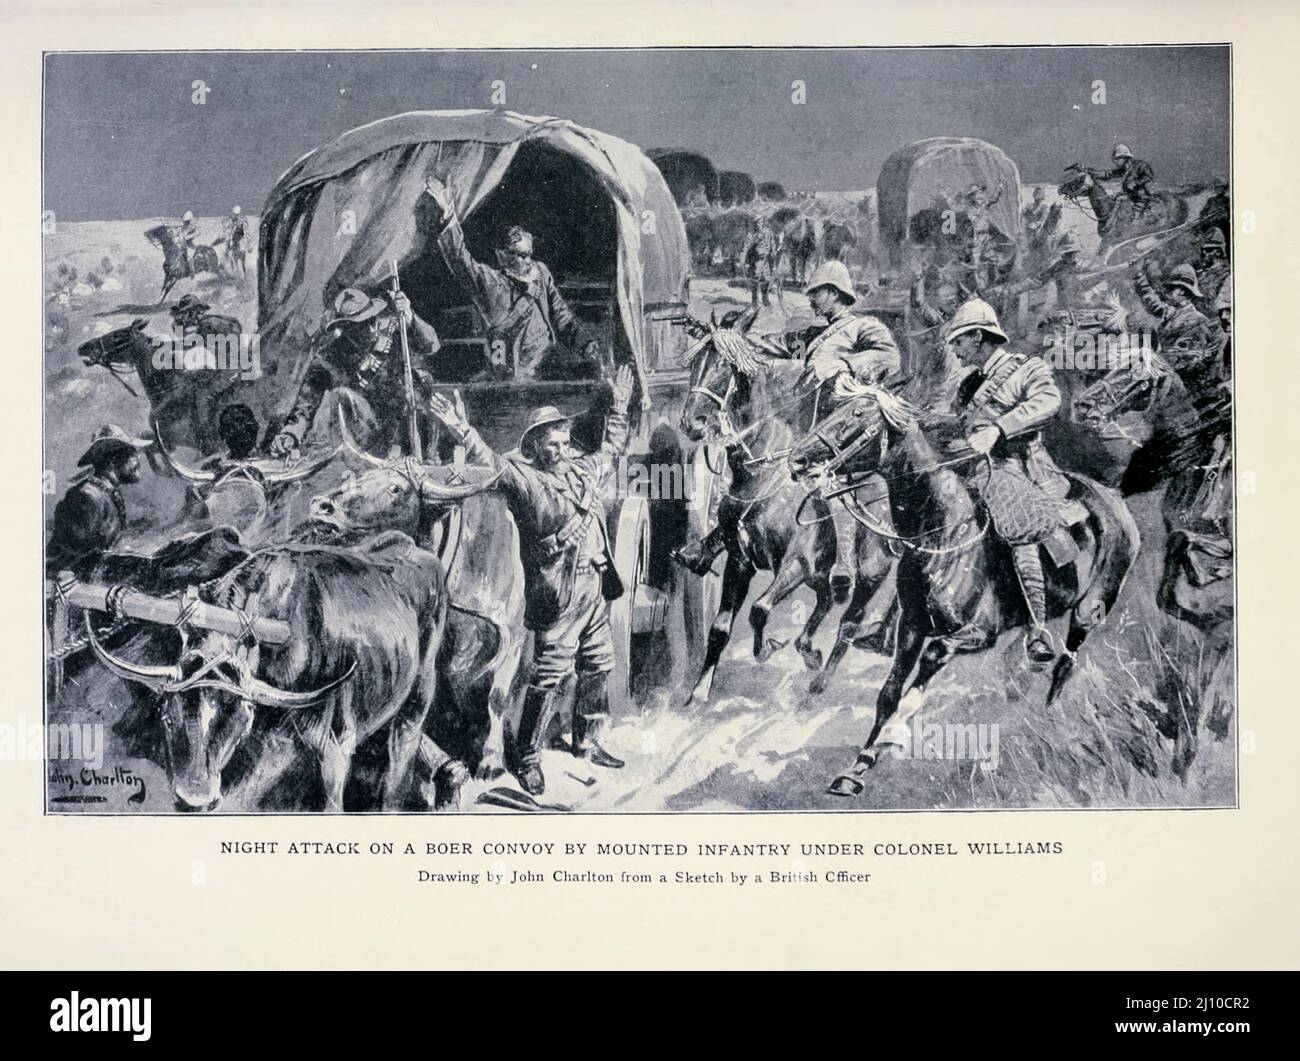 Night Attack on a Boer Convoy by Mounted Infantry under Colonel Williams Drawing by John Charlton from the book ' South Africa and the Transvaal war ' by Louis Creswicke, Publisher; Edinburgh : T. C. & E. C. Jack 1900 Stock Photo